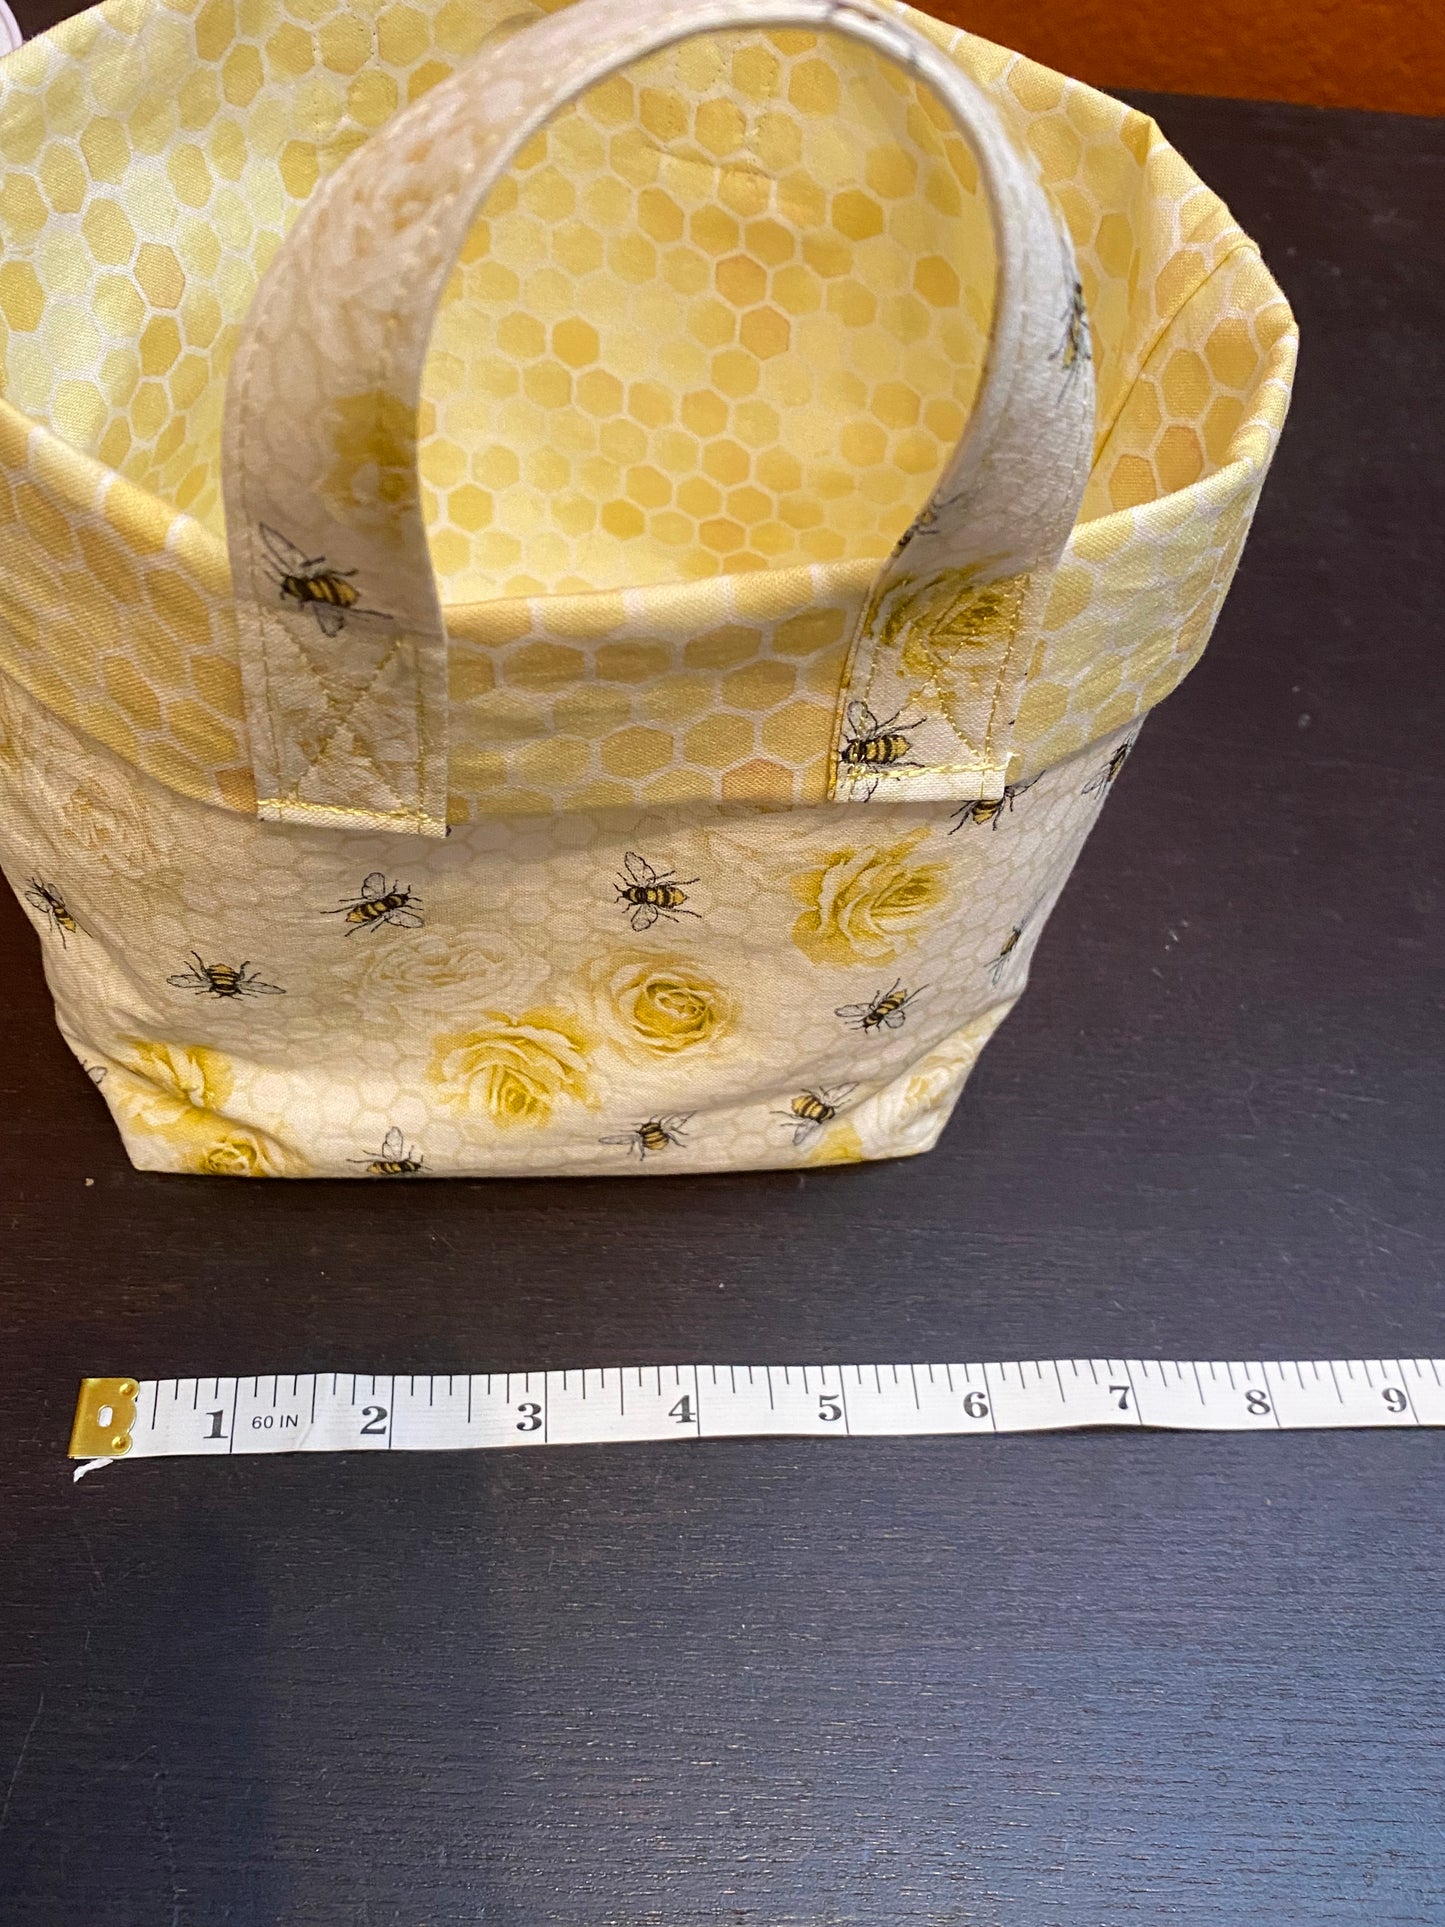 Honeybees and roses on honeycomb fabric basket